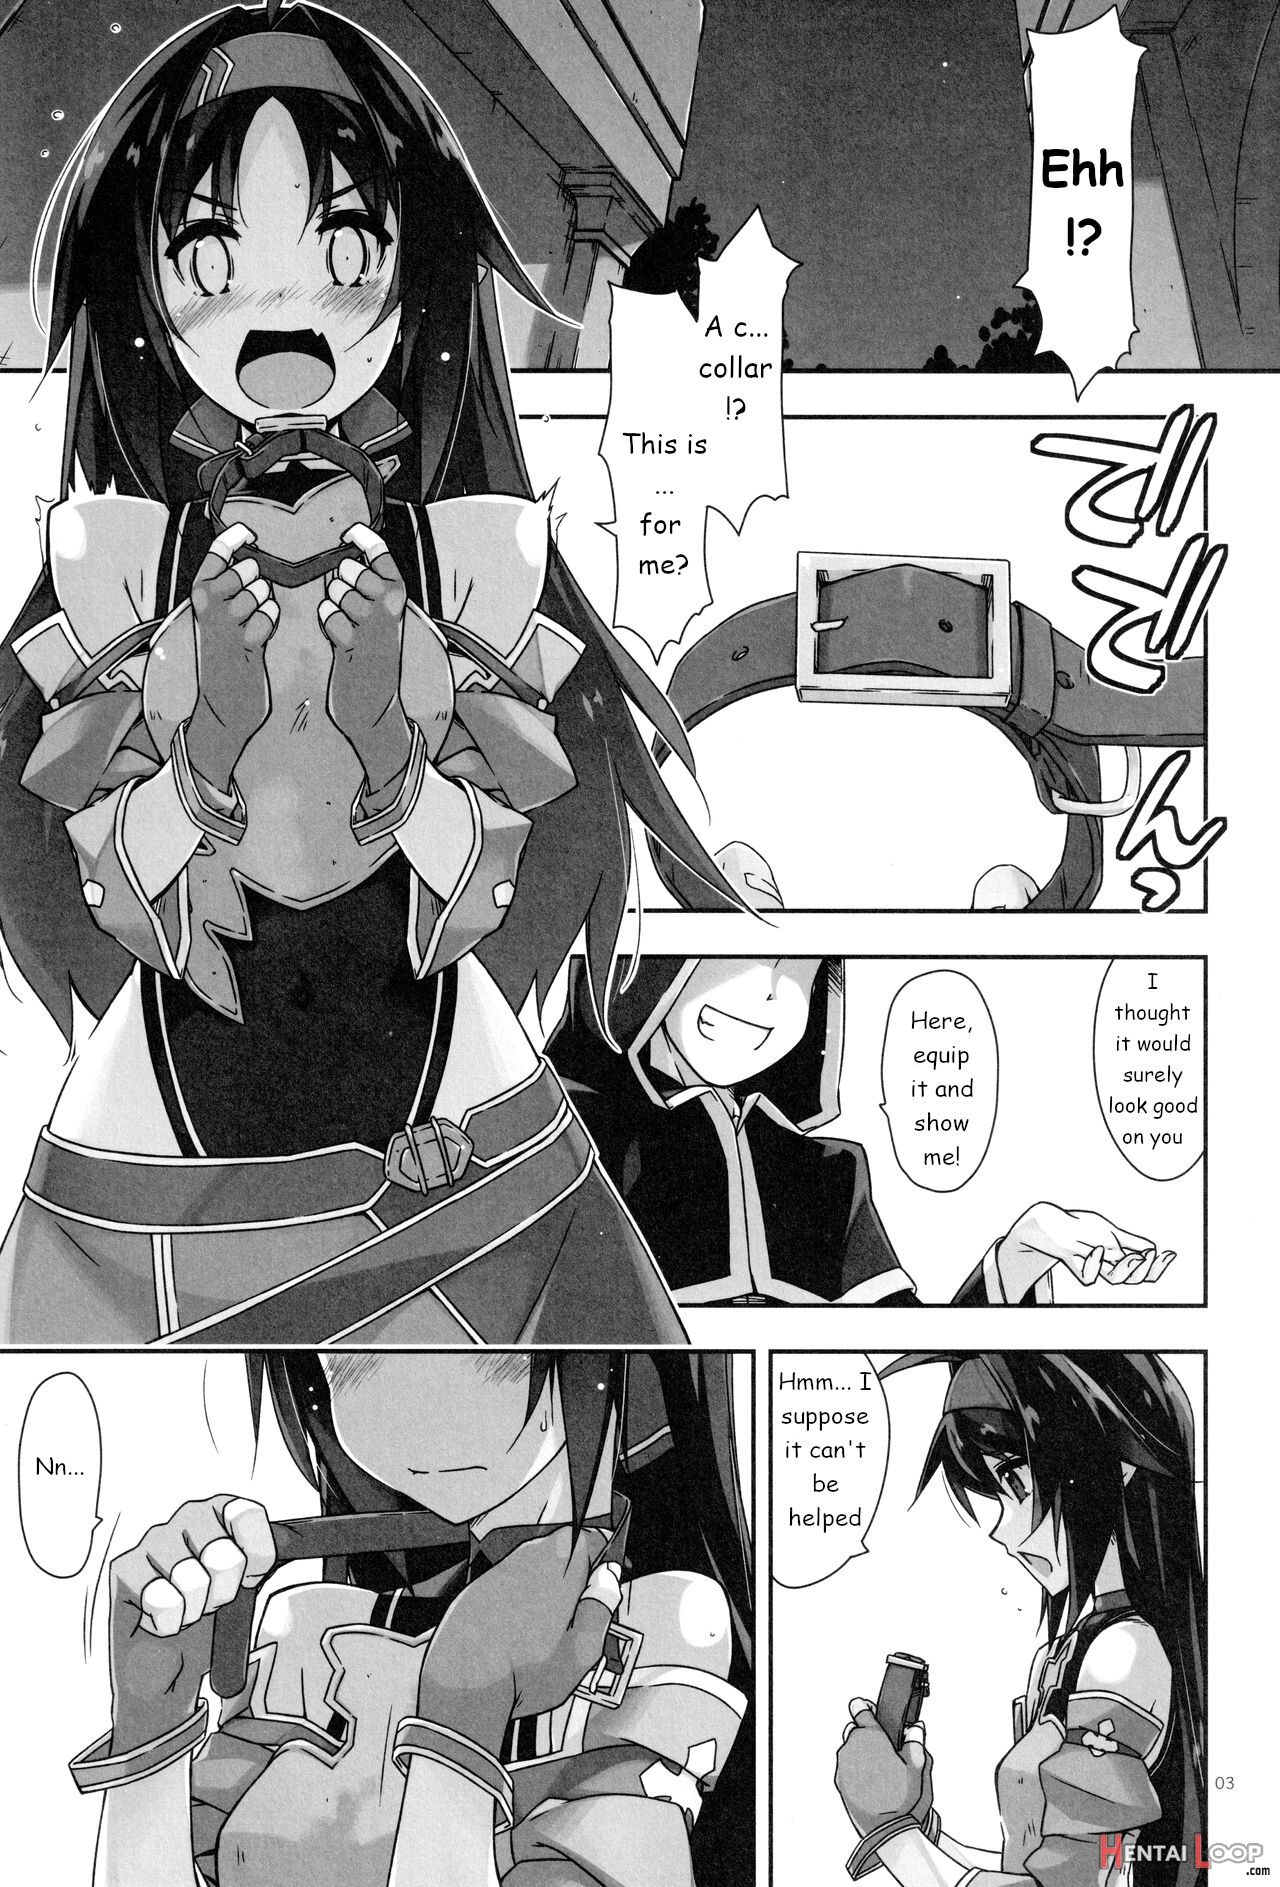 Toying With Yuuki 3 page 2